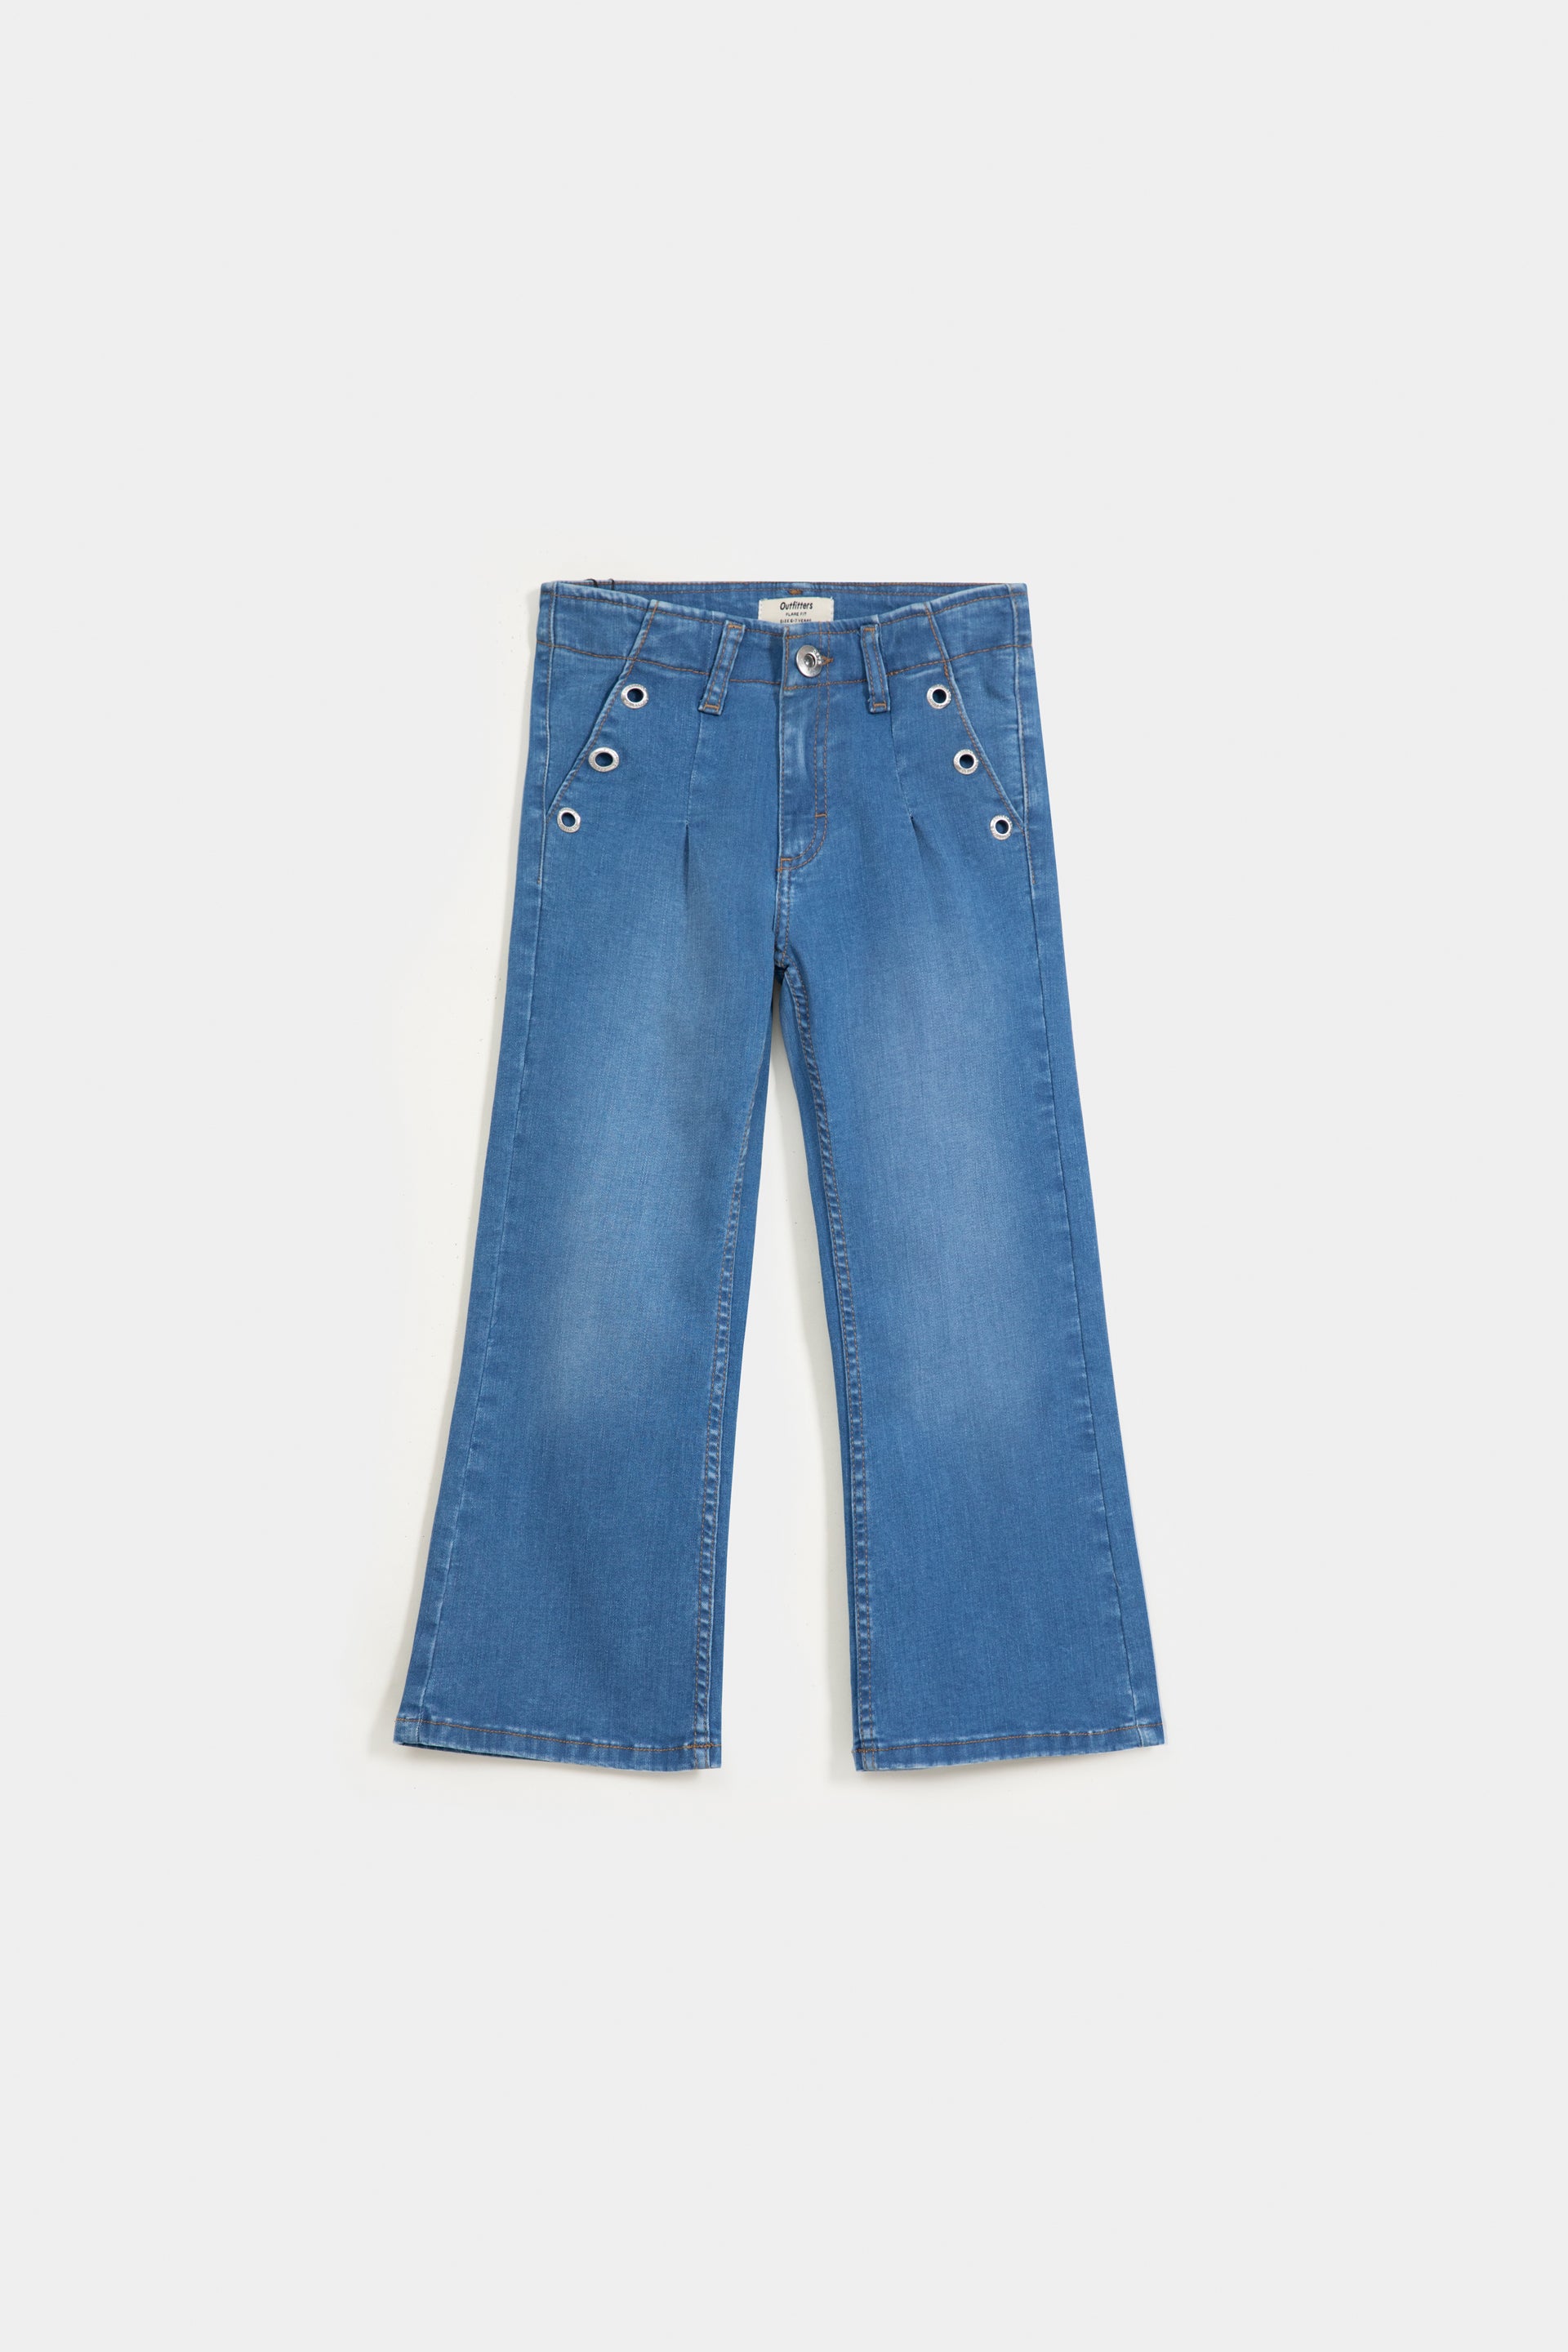 Flared Fit Jeans With Giant Eyelets At Pocket